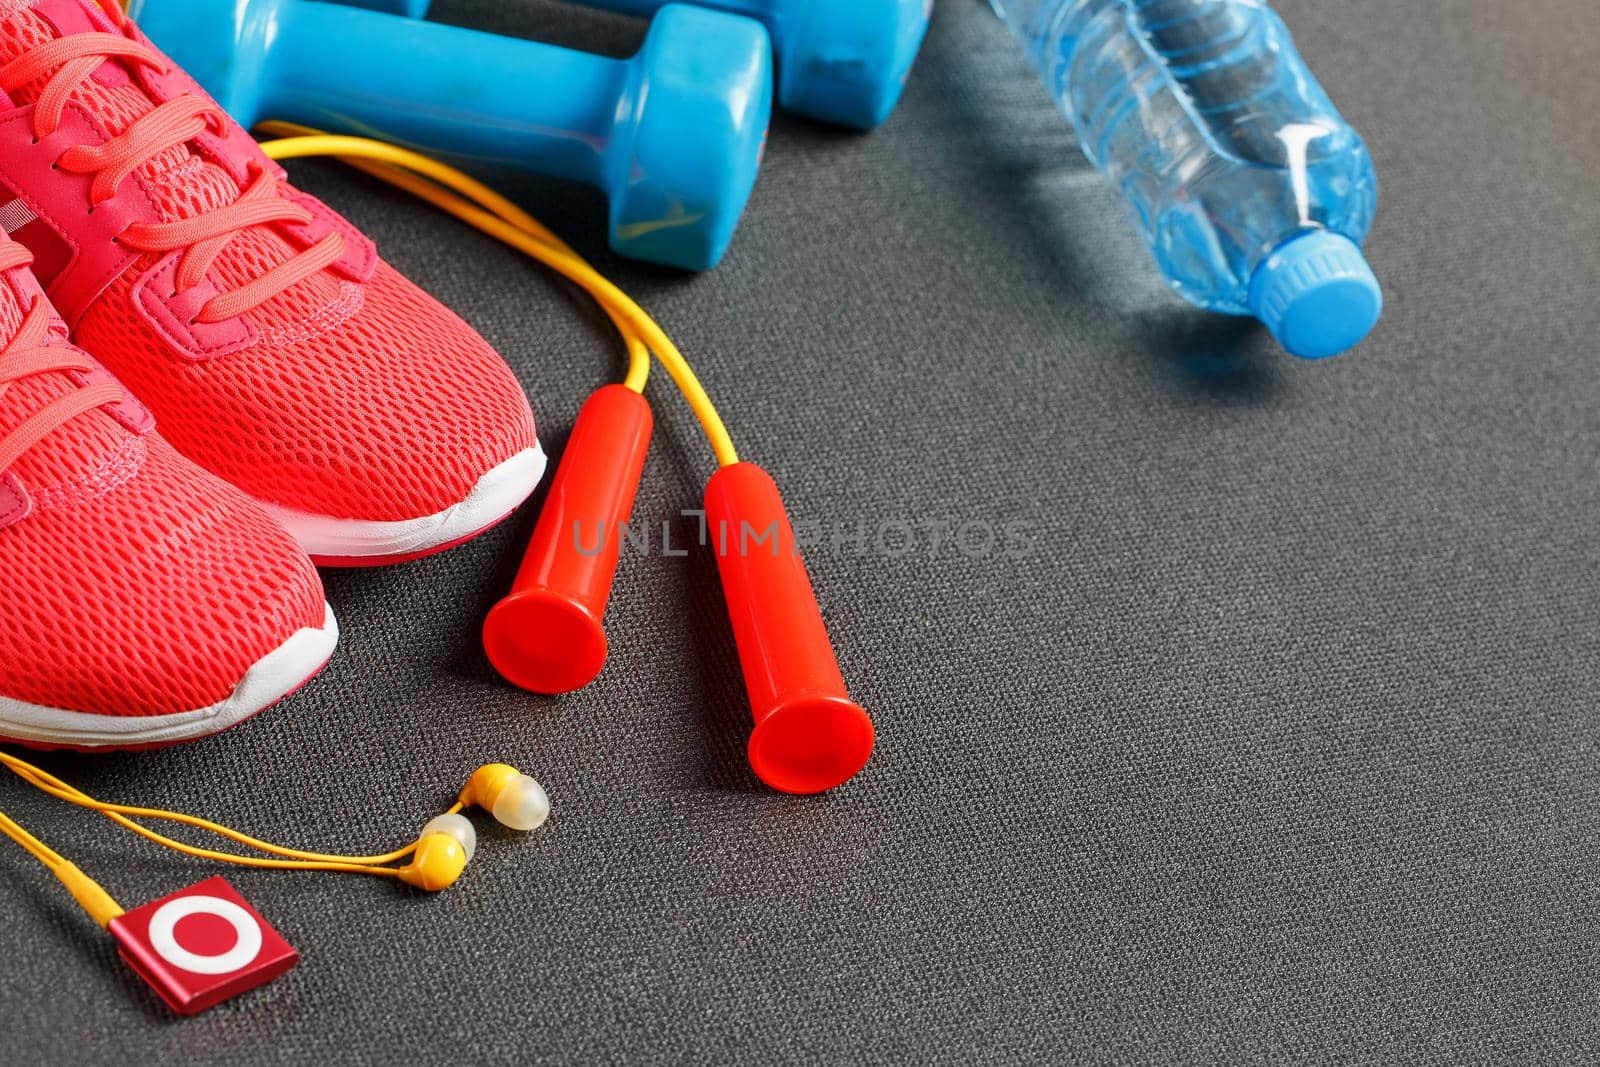 Top view of sports equipment, dumbbells, a skipping rope, a bottle of water, sneakers and a player. Against a gray background